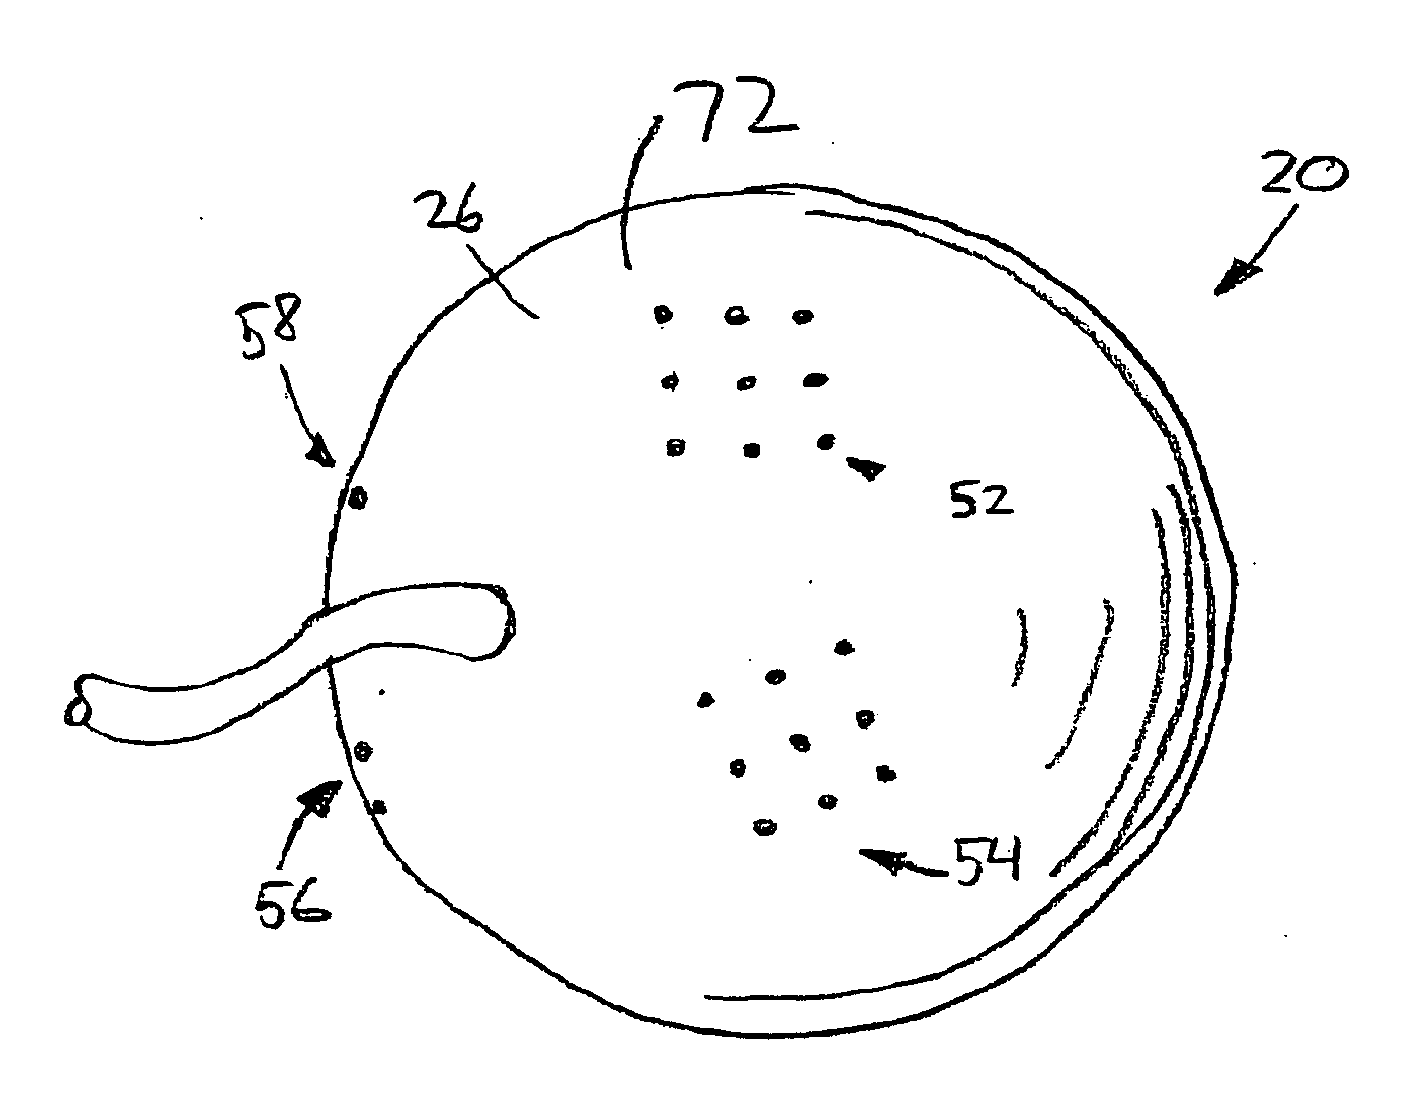 System and method for treating connective tissue